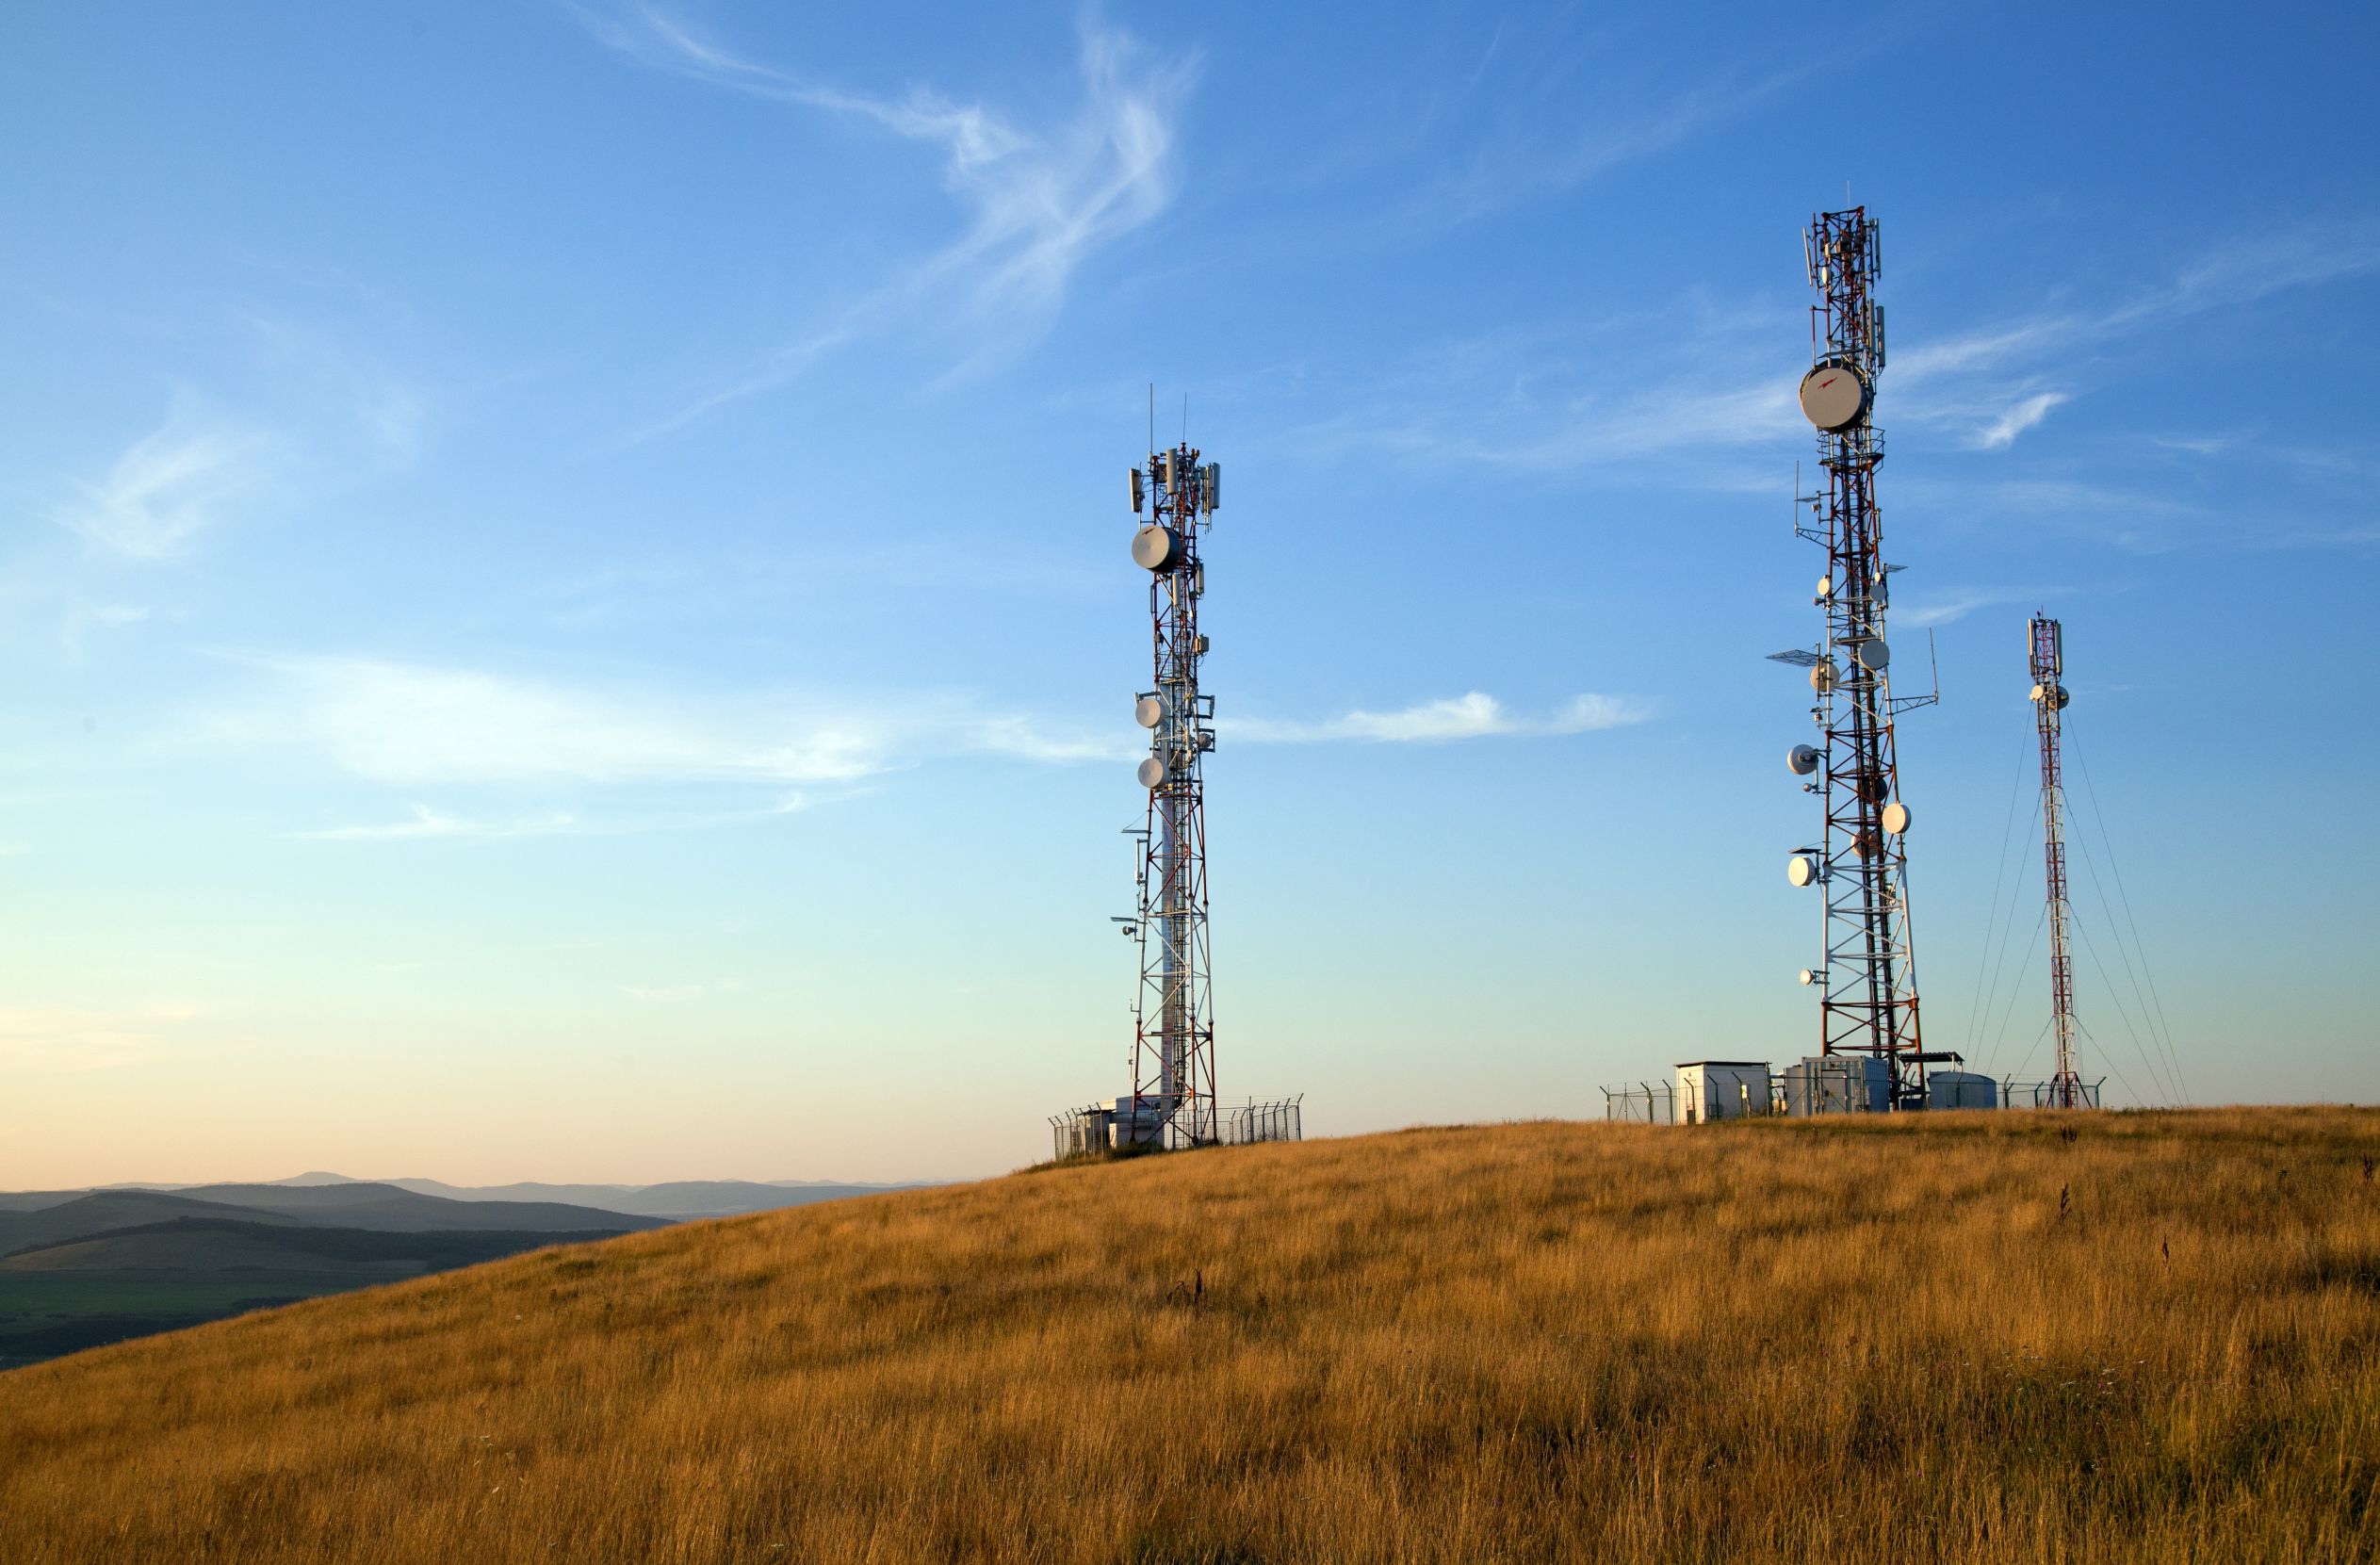 Should I Hire A Consultant for Cell Tower Leasing?